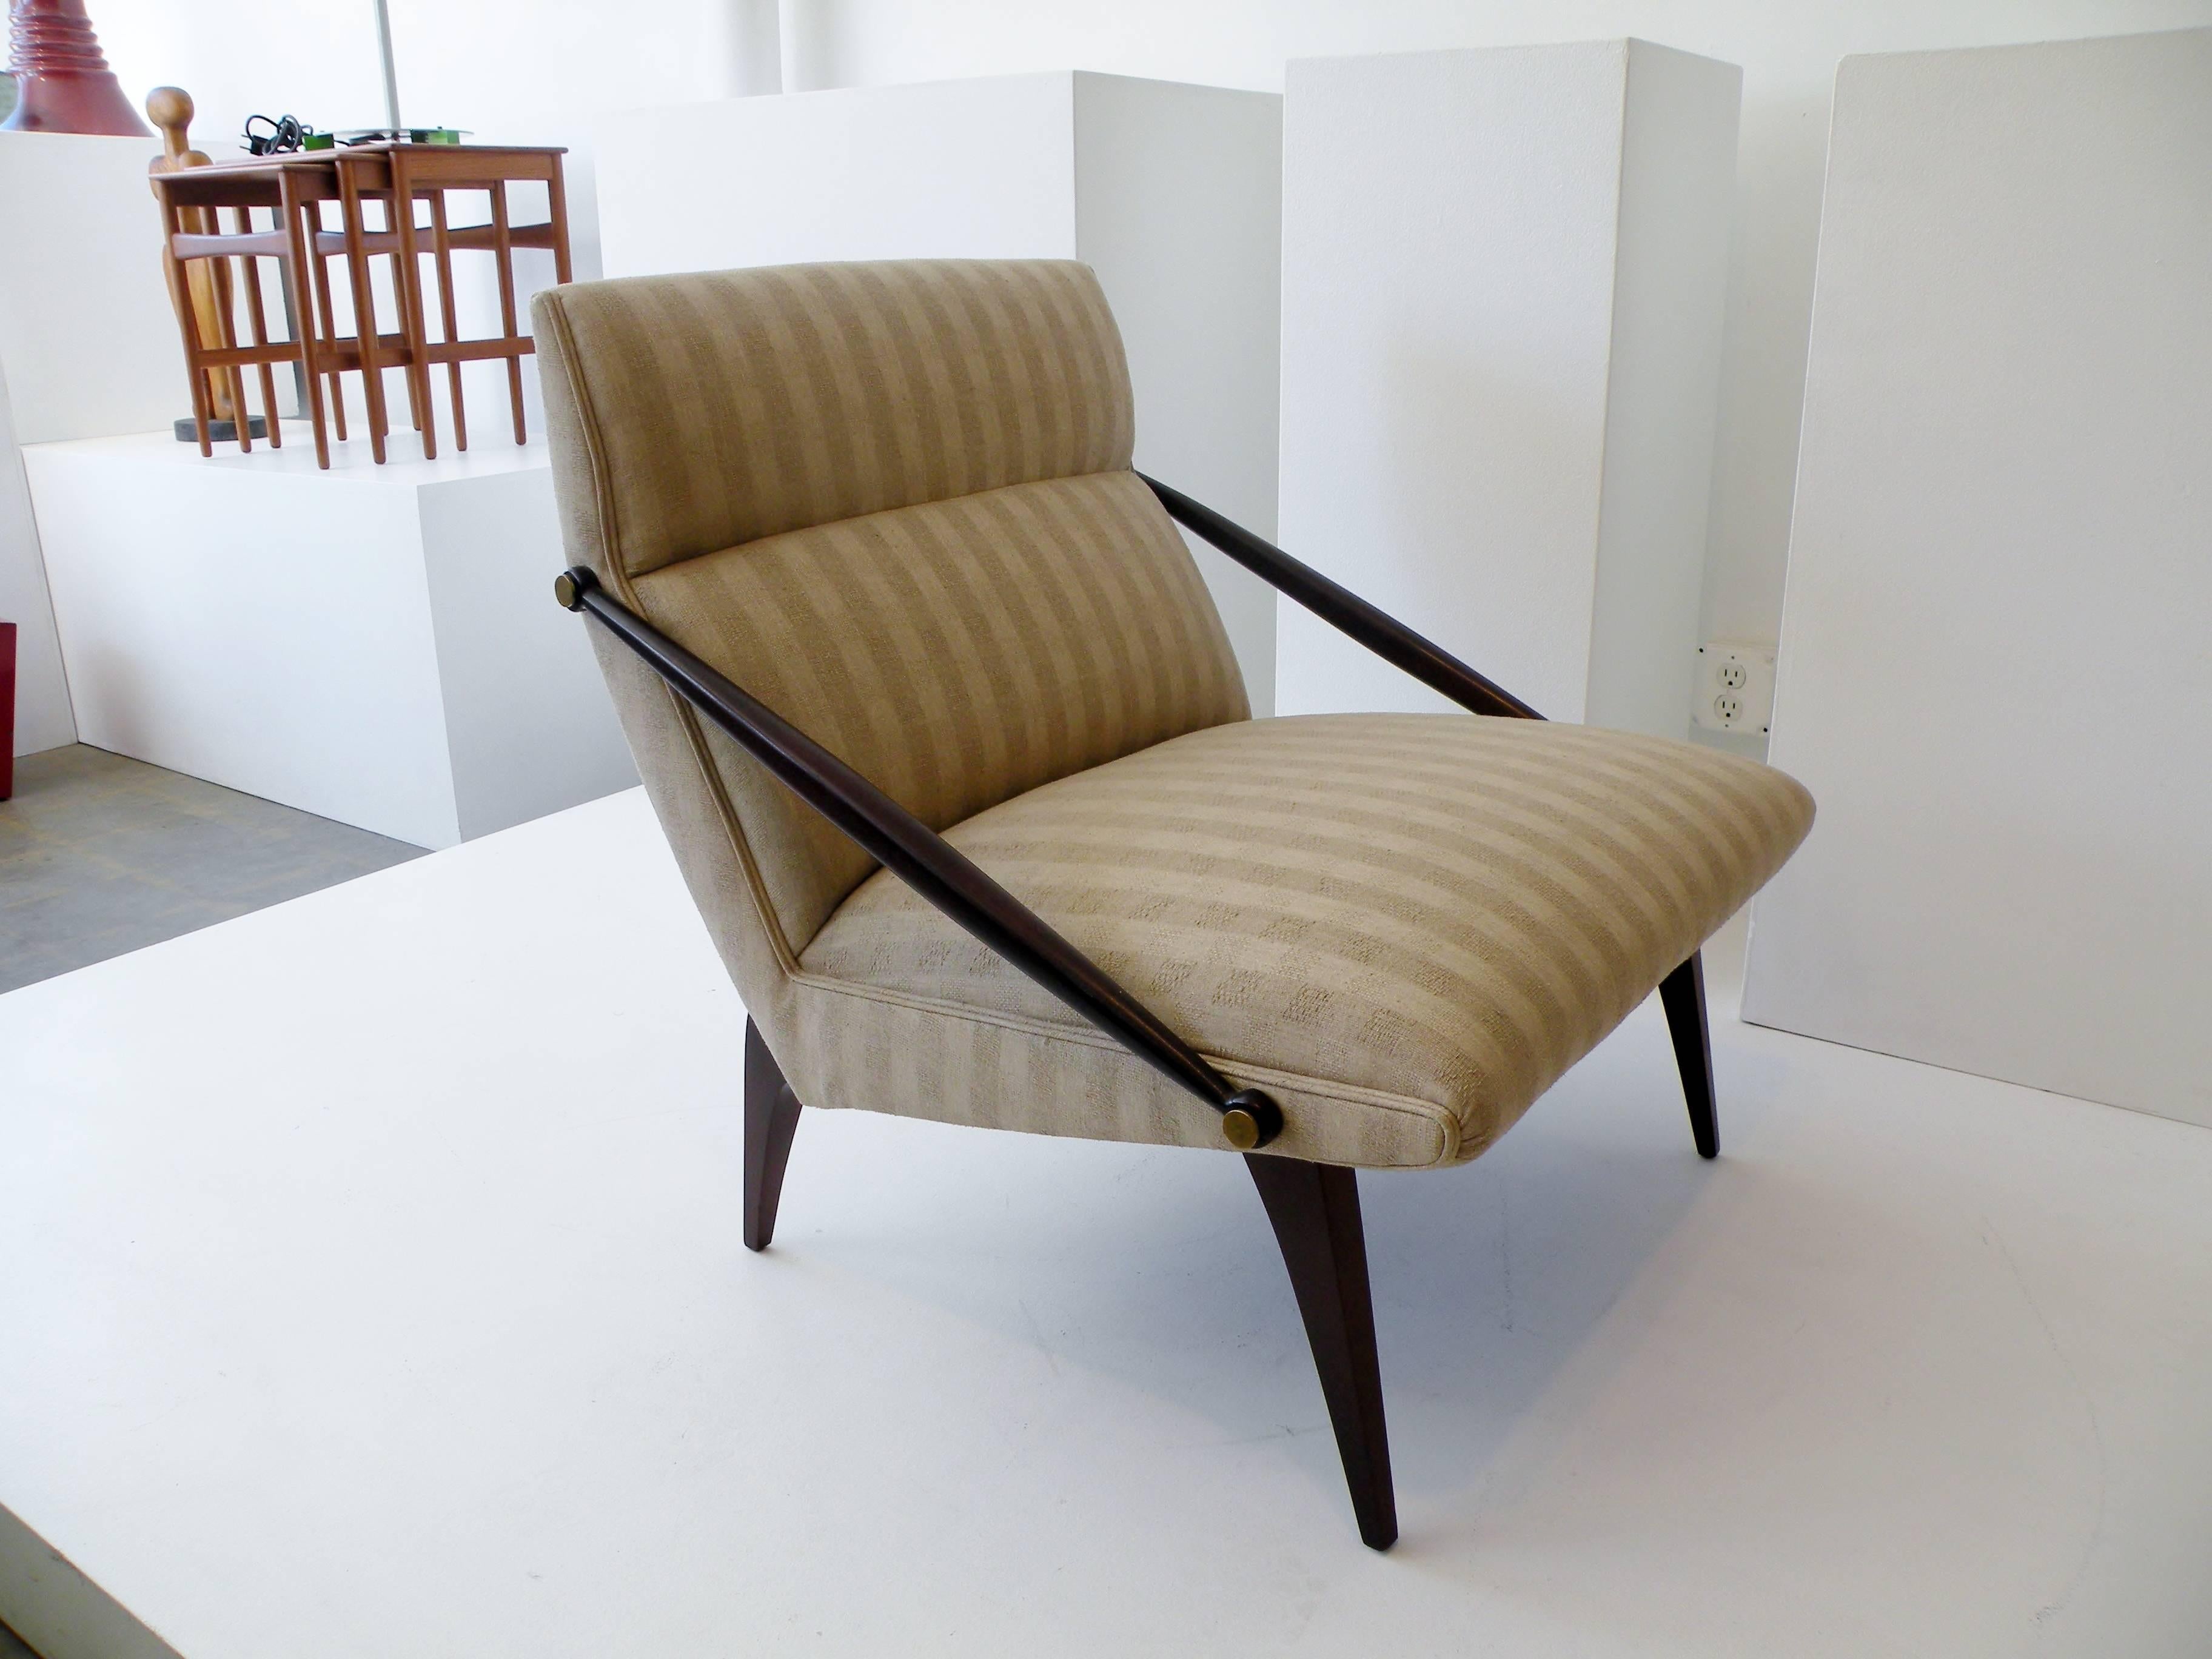 Brass 1950s Gio Ponti Style Cantilevered Lounge Chair Made by Singer & Sons